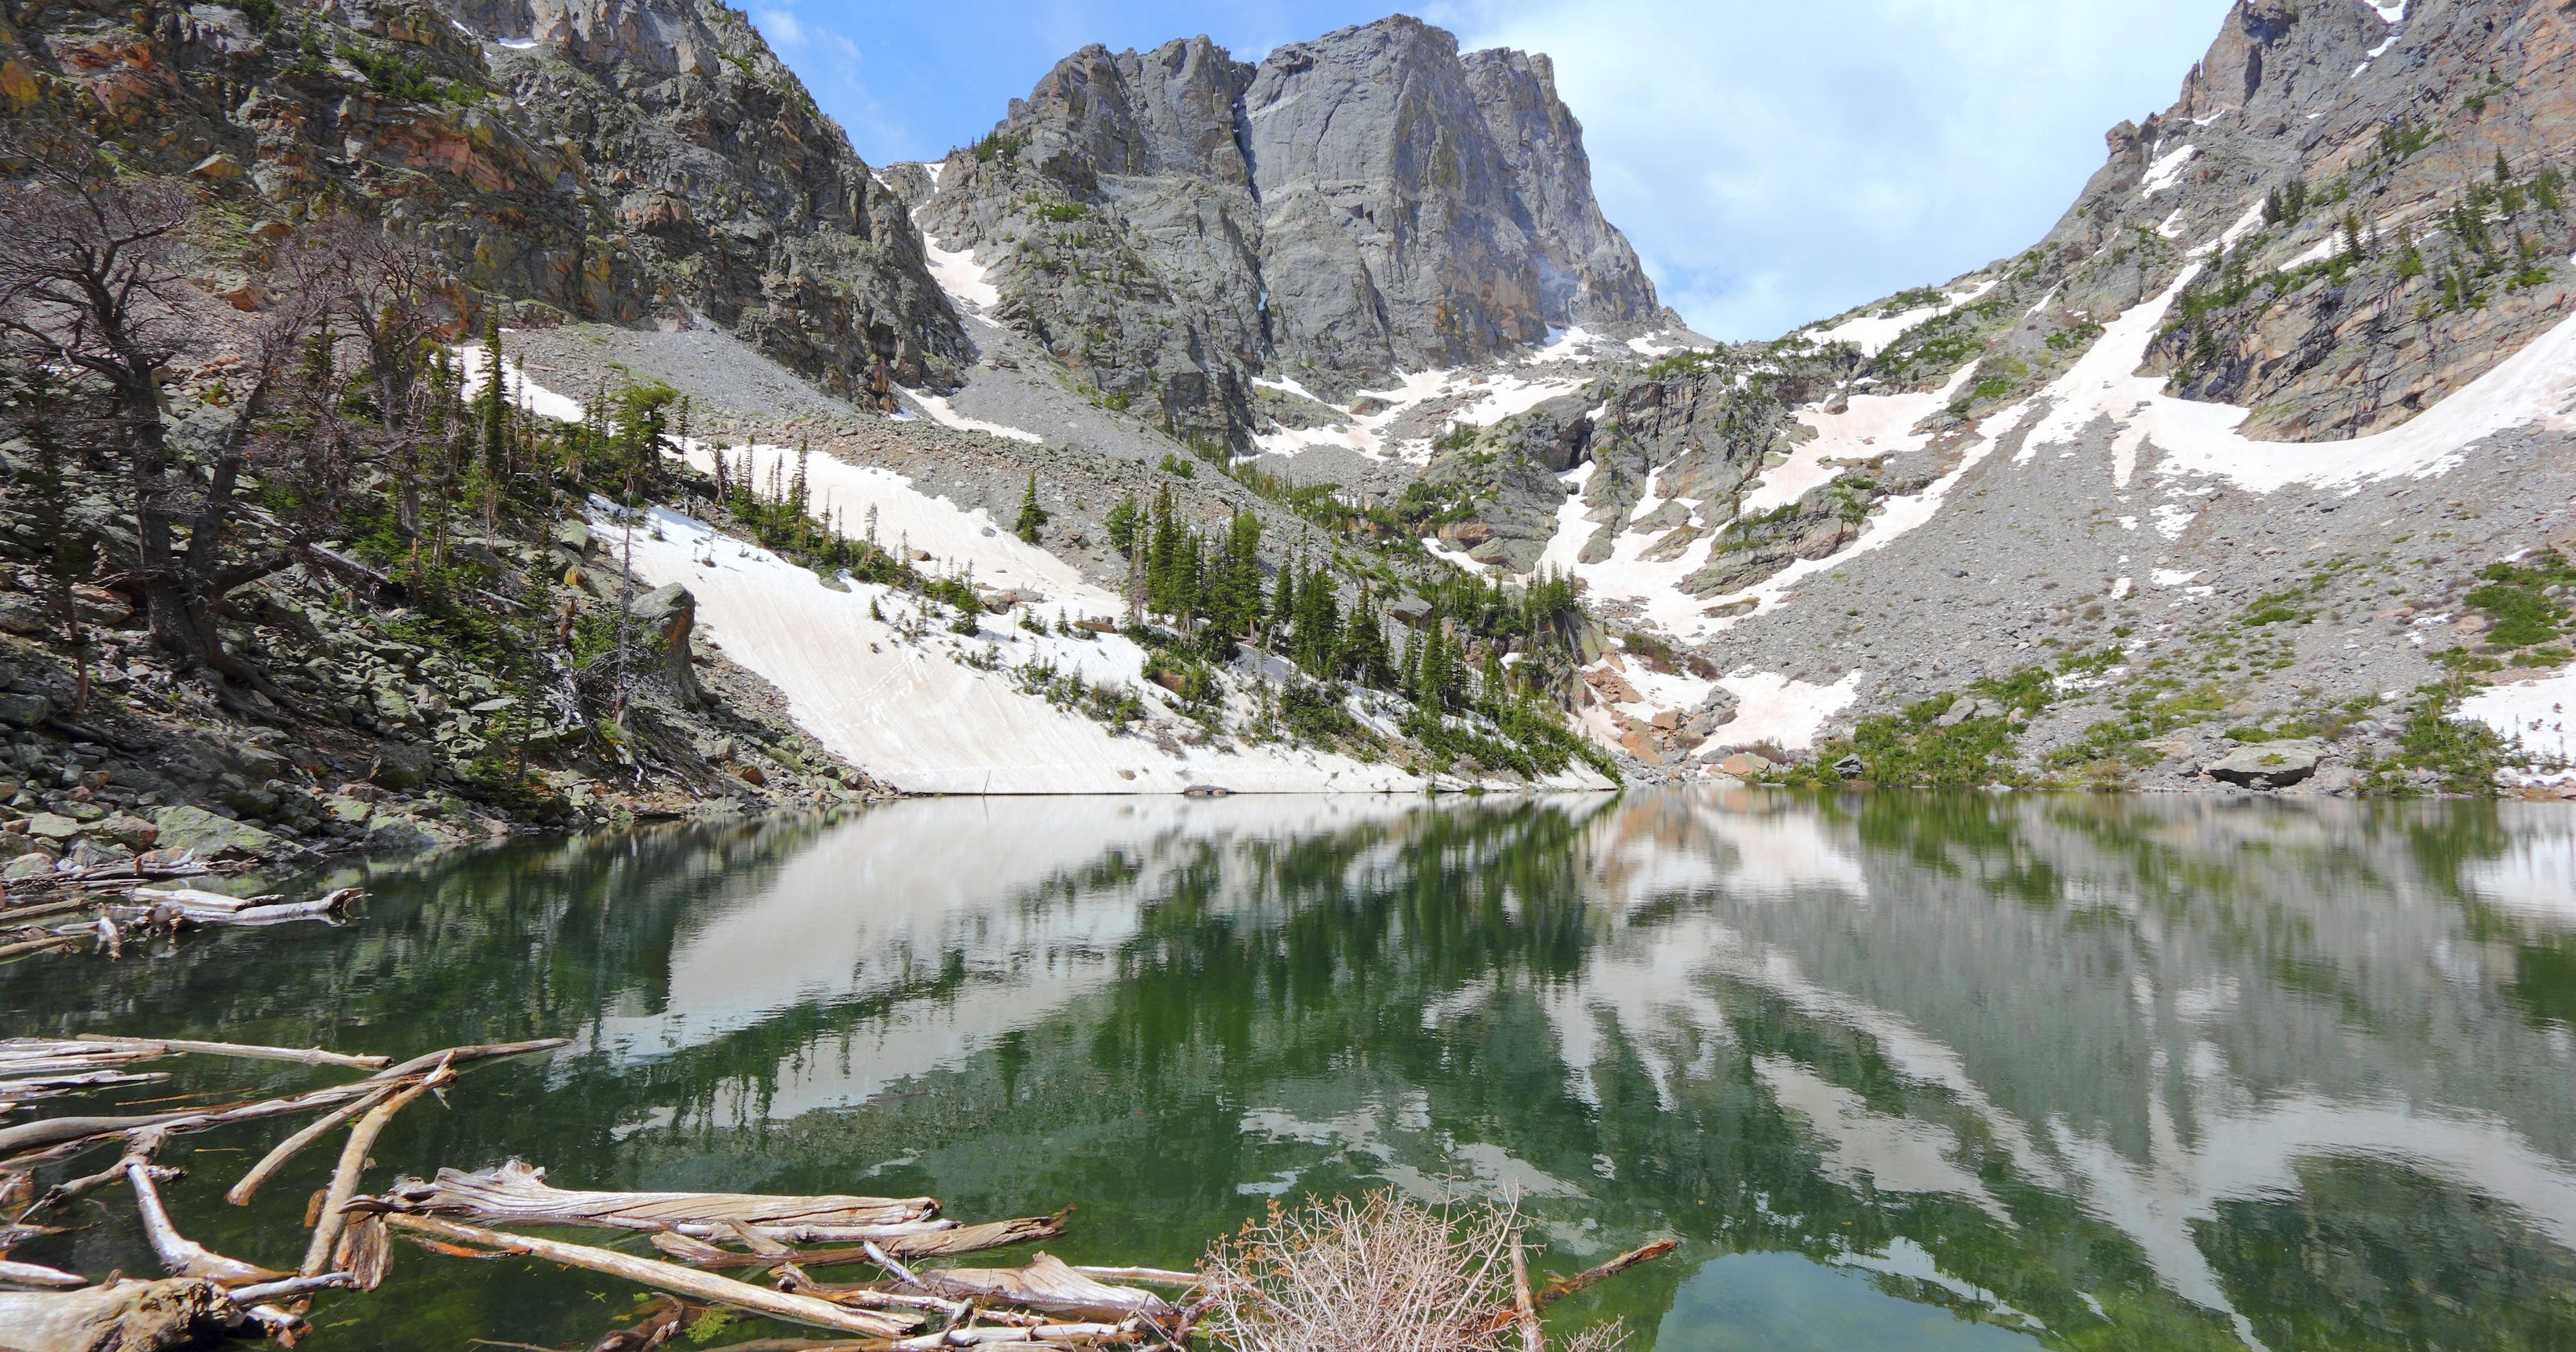 Visit these 7 alpine lake hikes to escape the heat